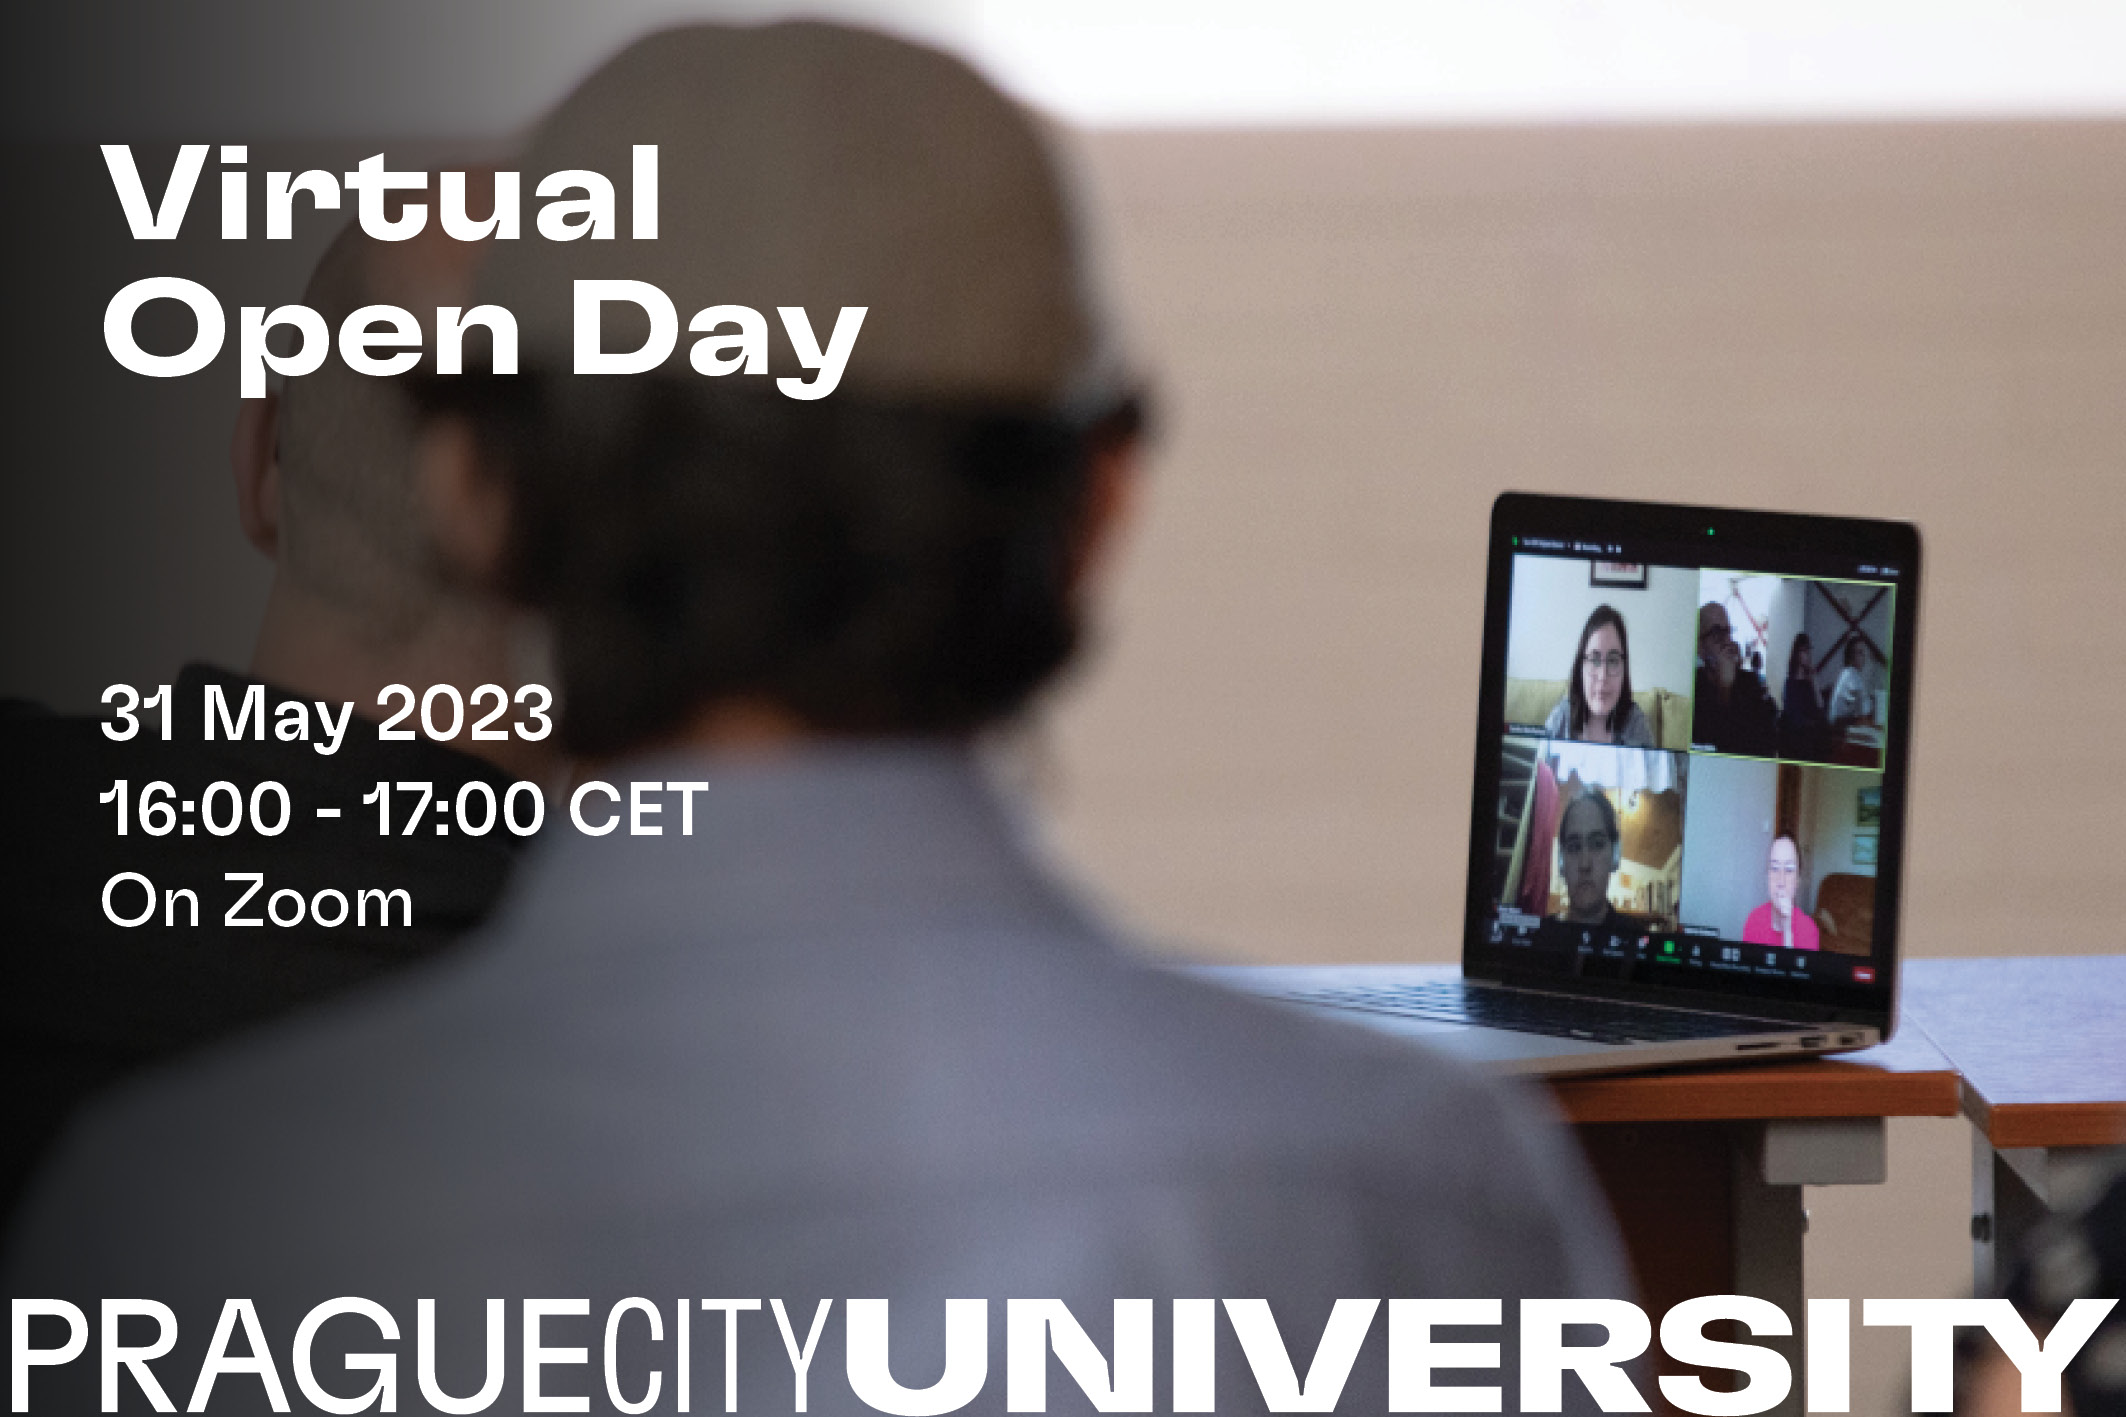 Virtual Open Day 31 MAY 2023 16.00 - 17.00 CET on zoom